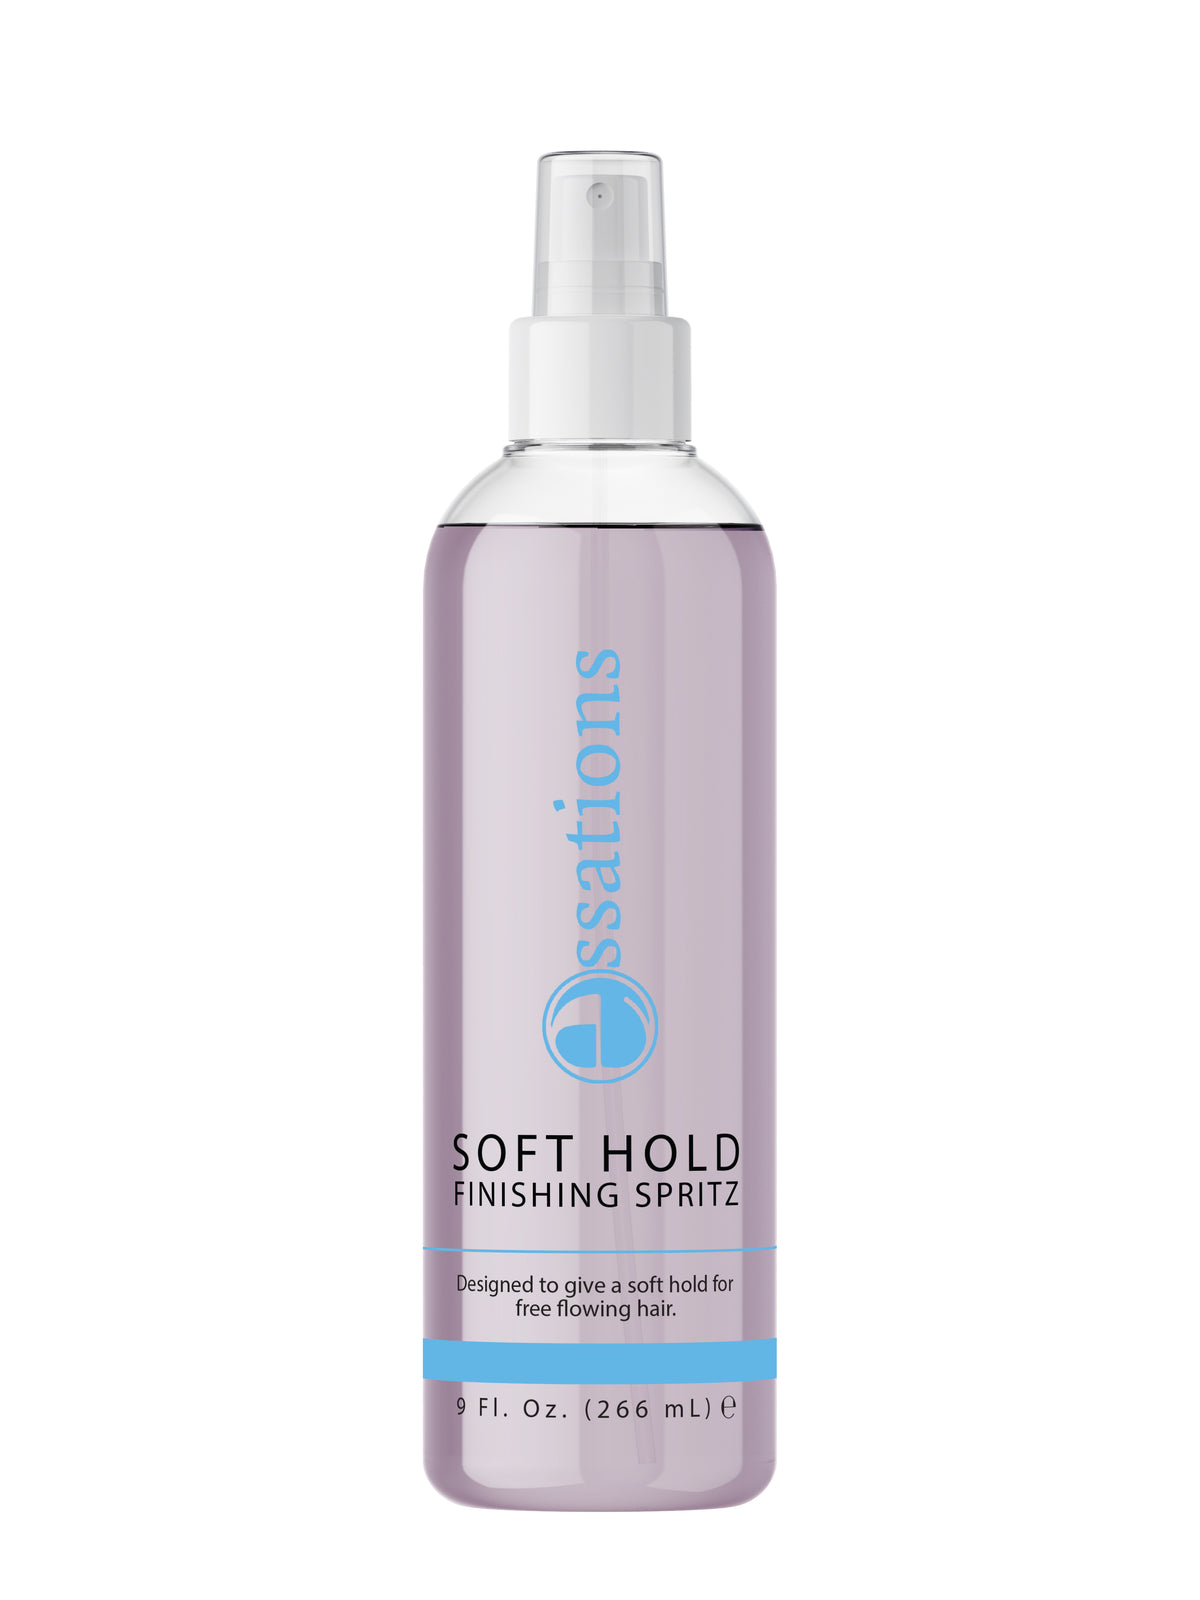 Soft Hold Finishing Spritz by Essations